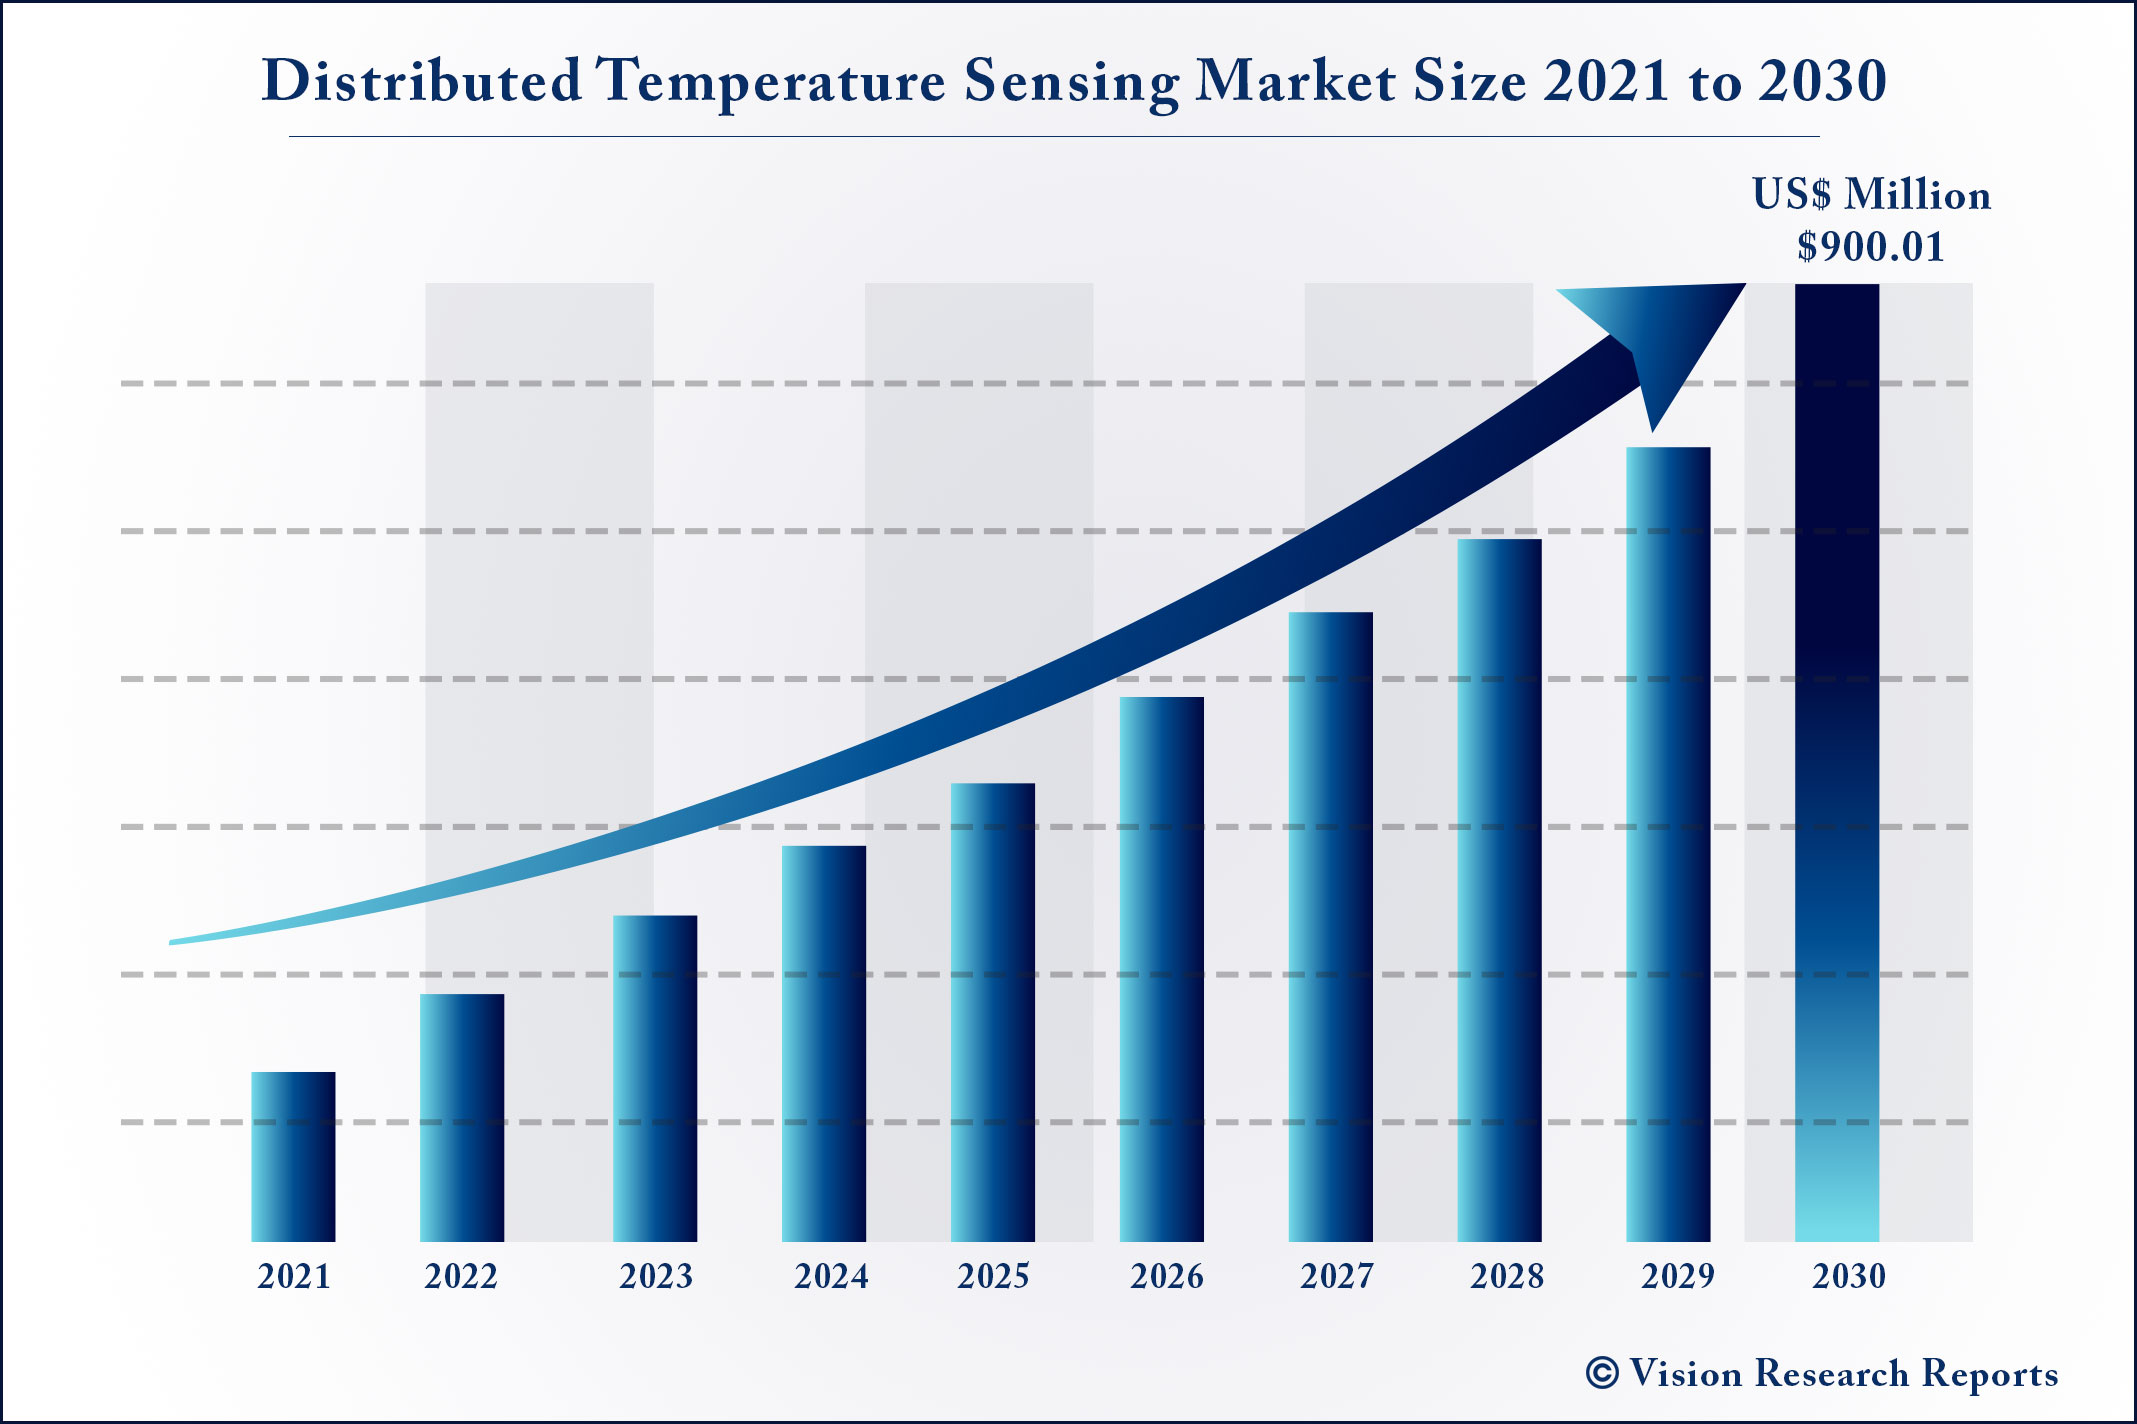 Distributed Temperature Sensing Market Size 2021 to 2030